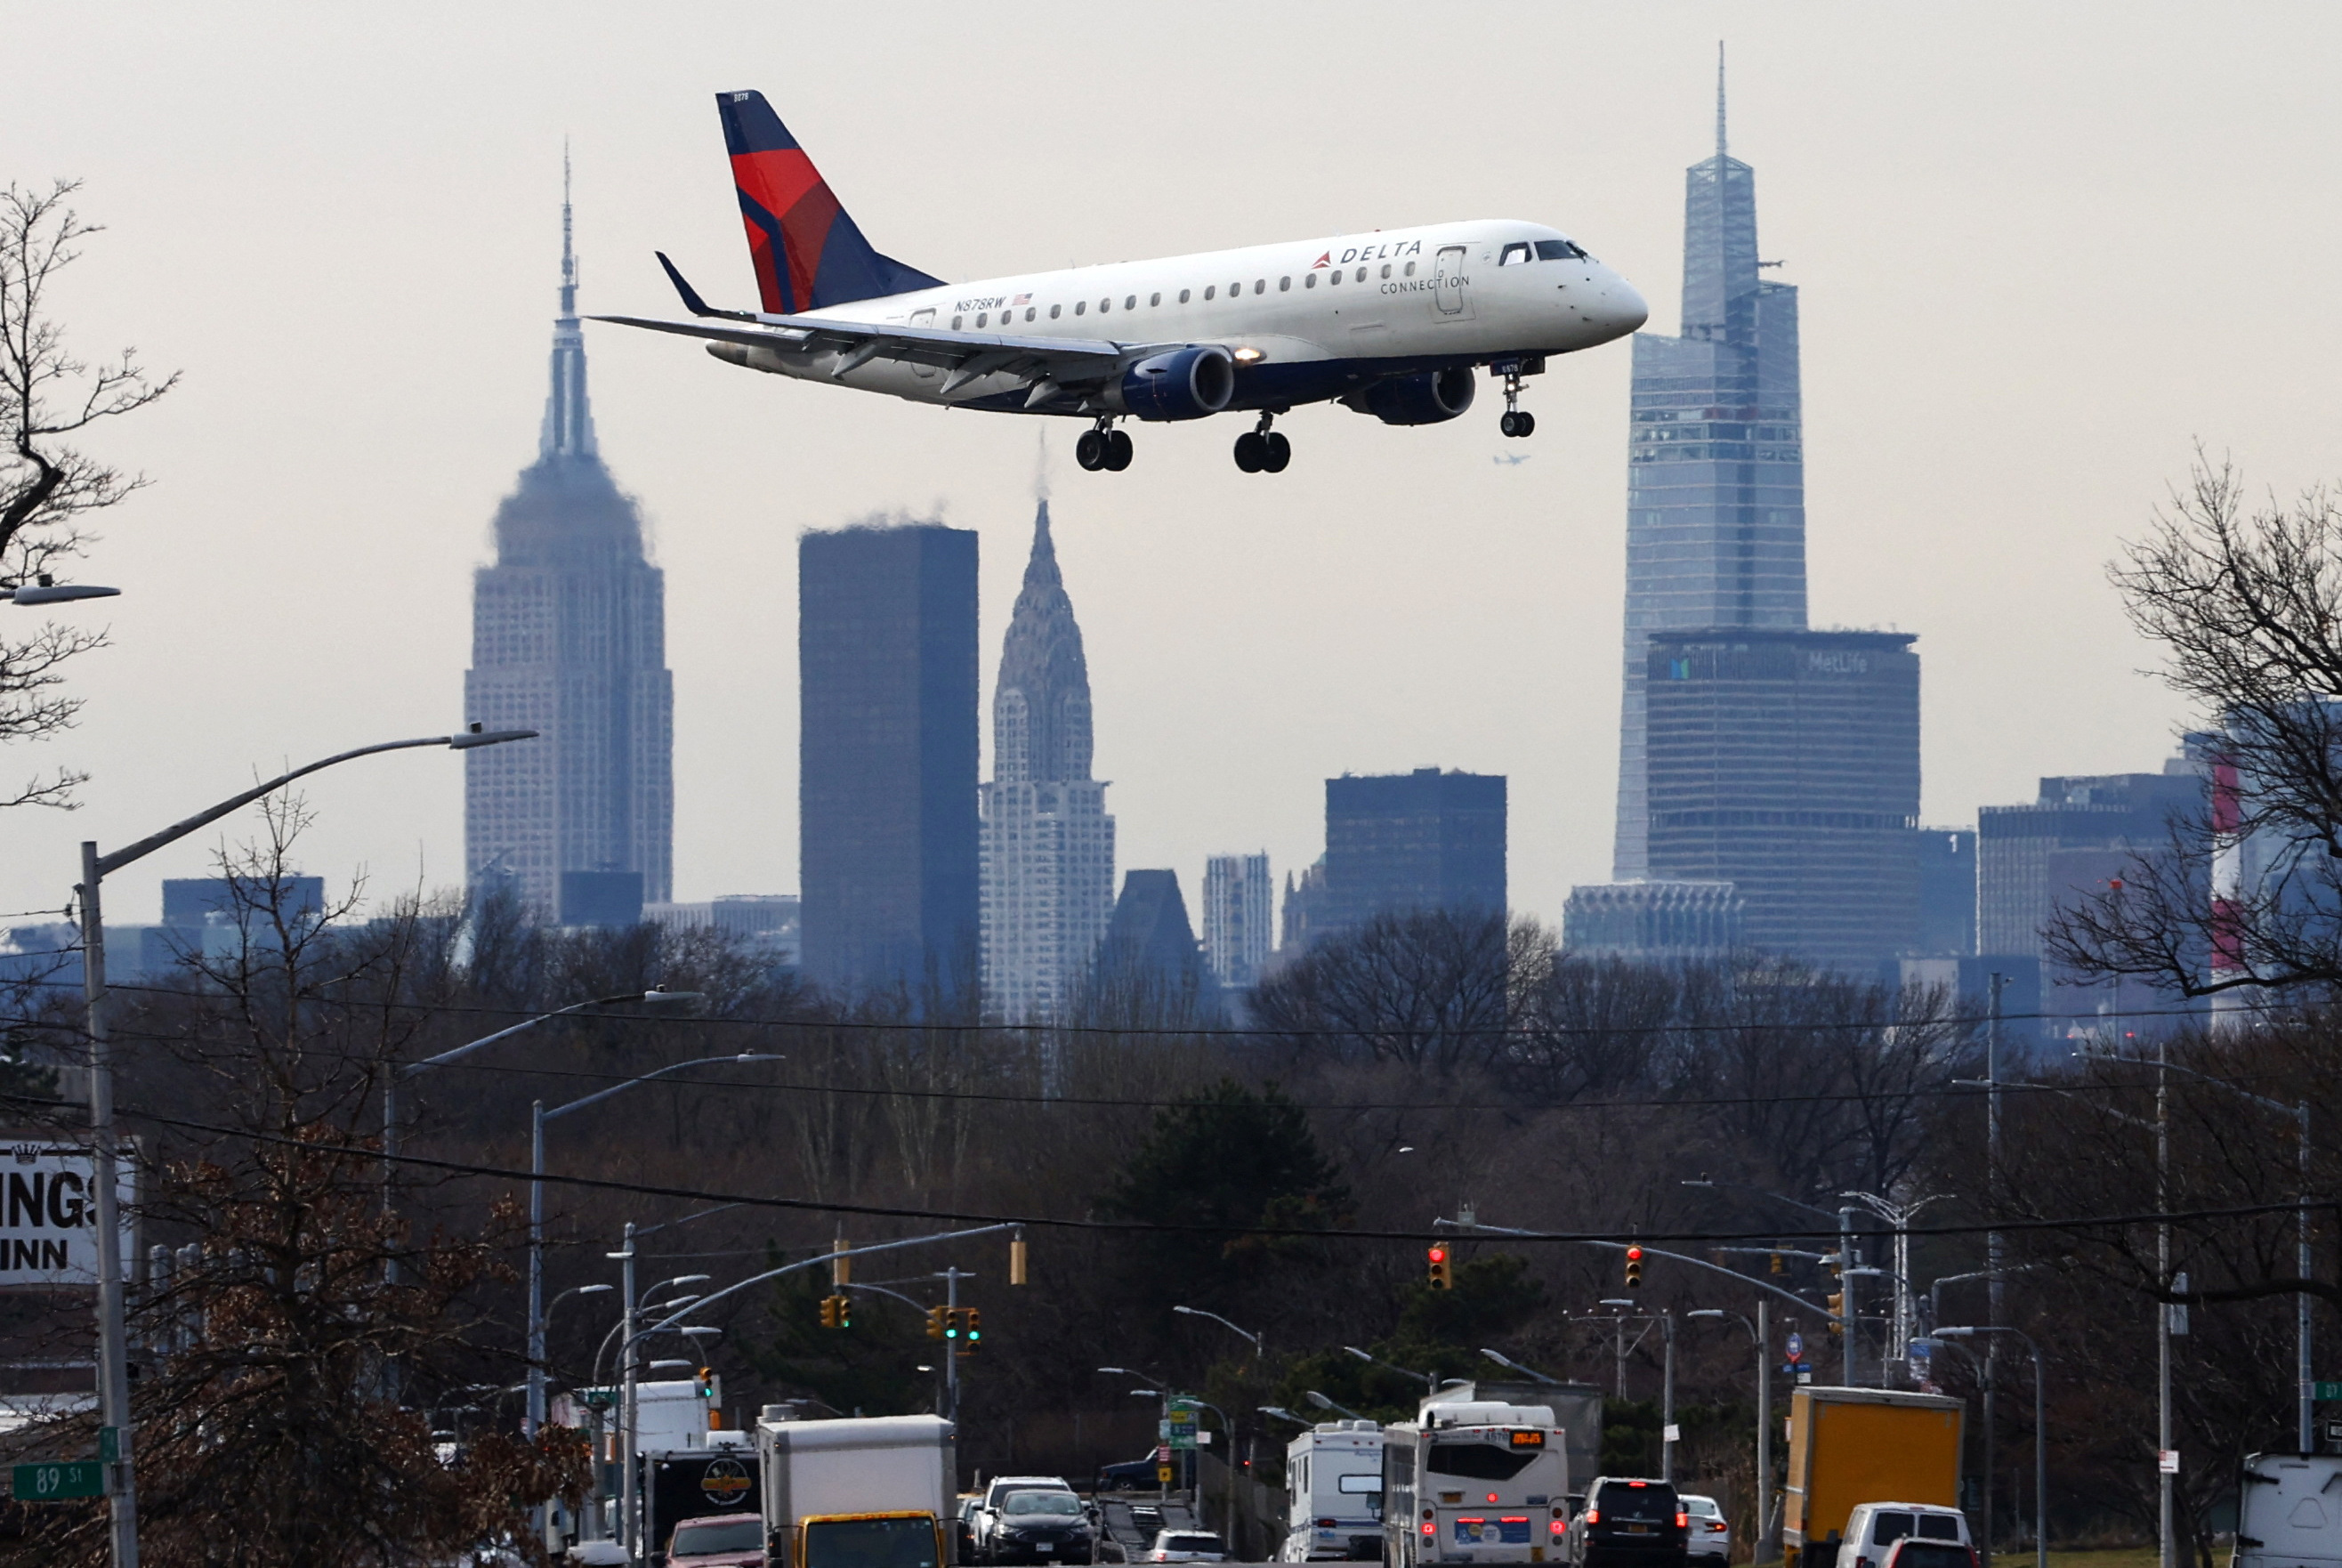 Airplanes resume flights after FAA system outage at LaGuardia Airport in New York